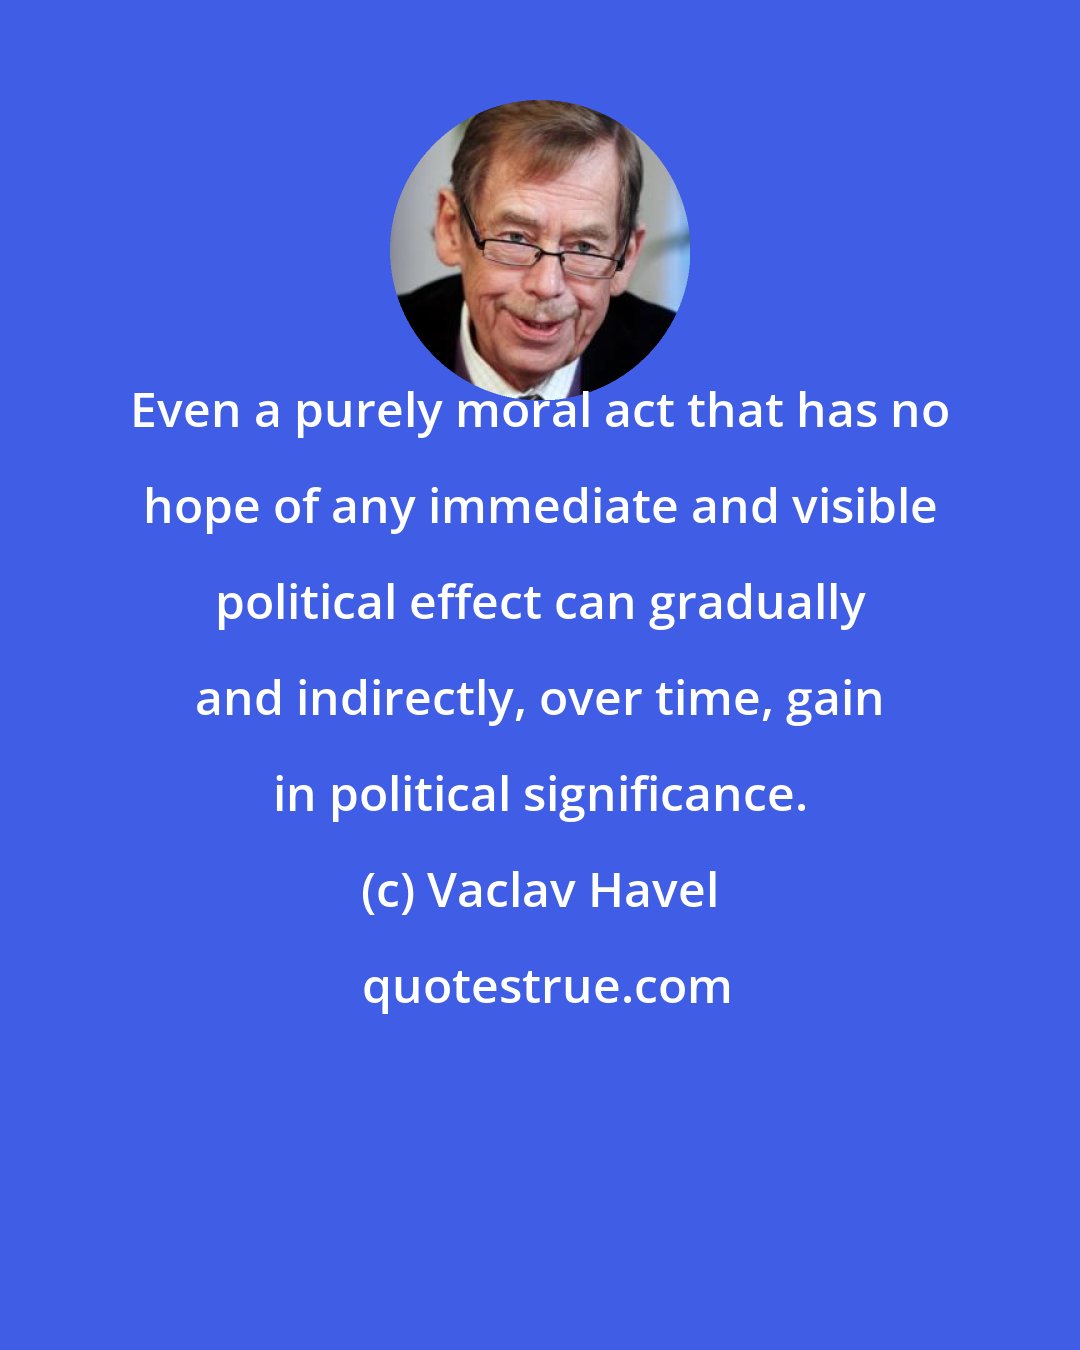 Vaclav Havel: Even a purely moral act that has no hope of any immediate and visible political effect can gradually and indirectly, over time, gain in political significance.